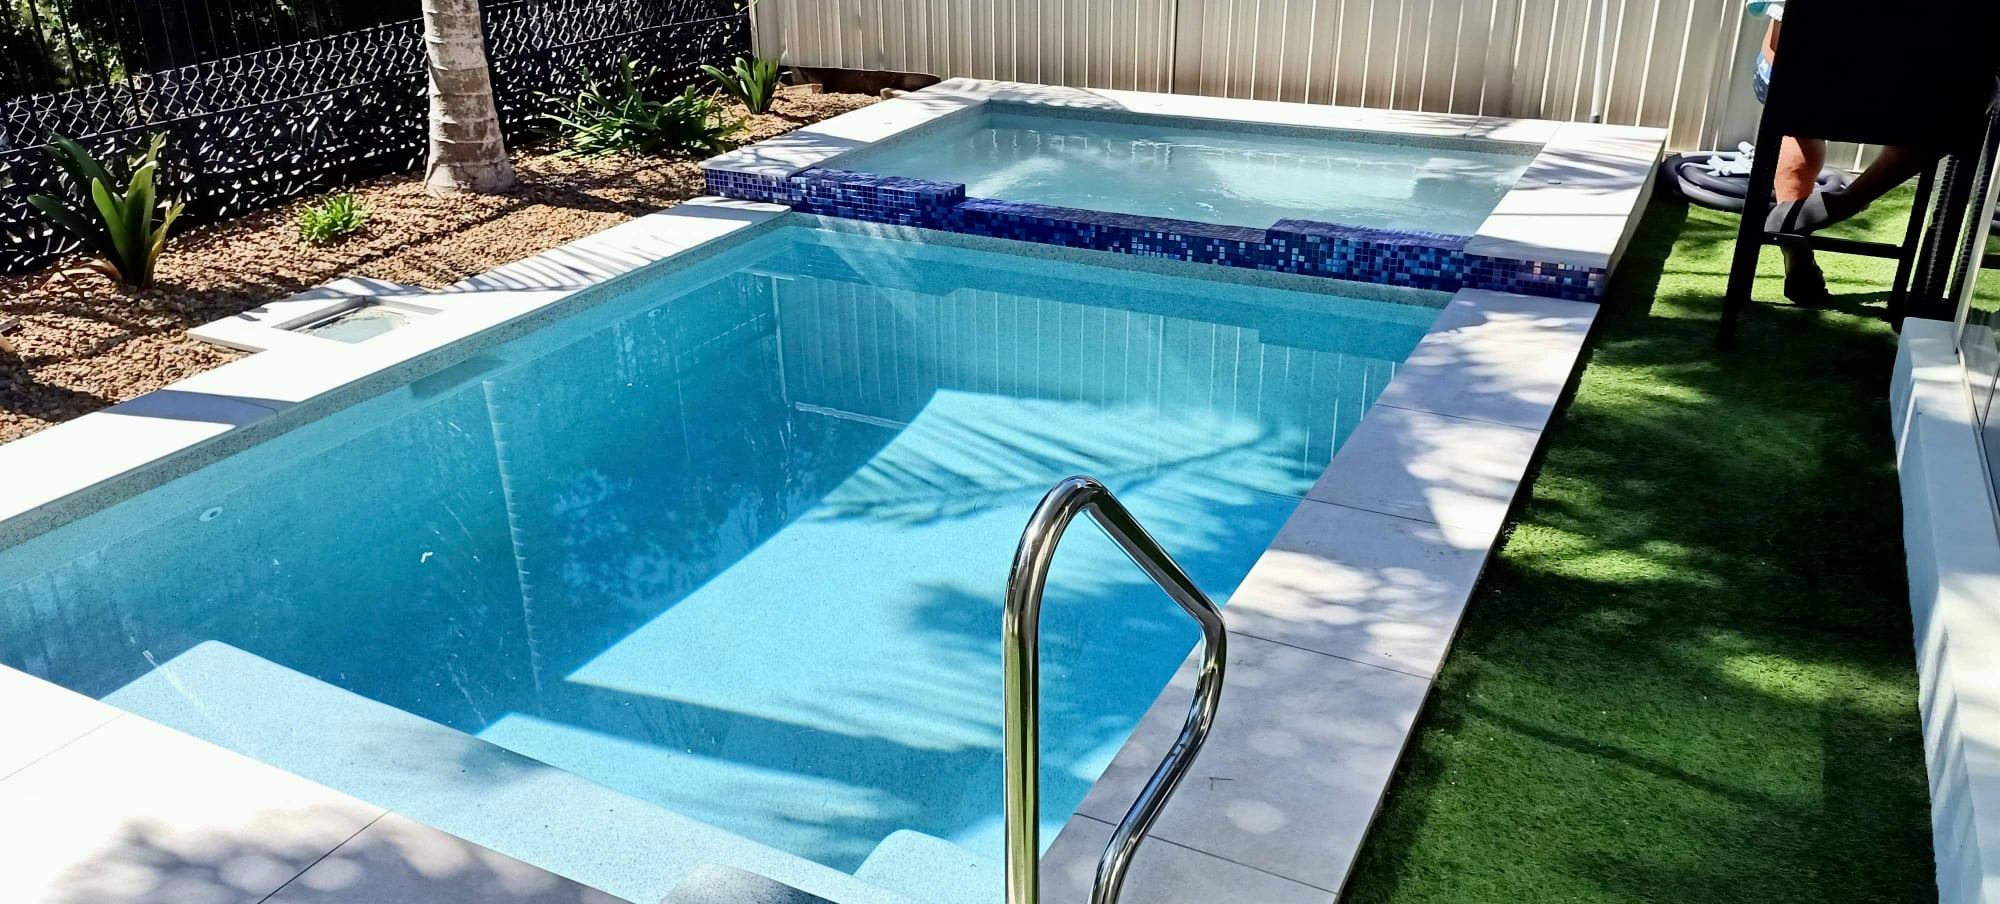 how to maintain your pool during winter 